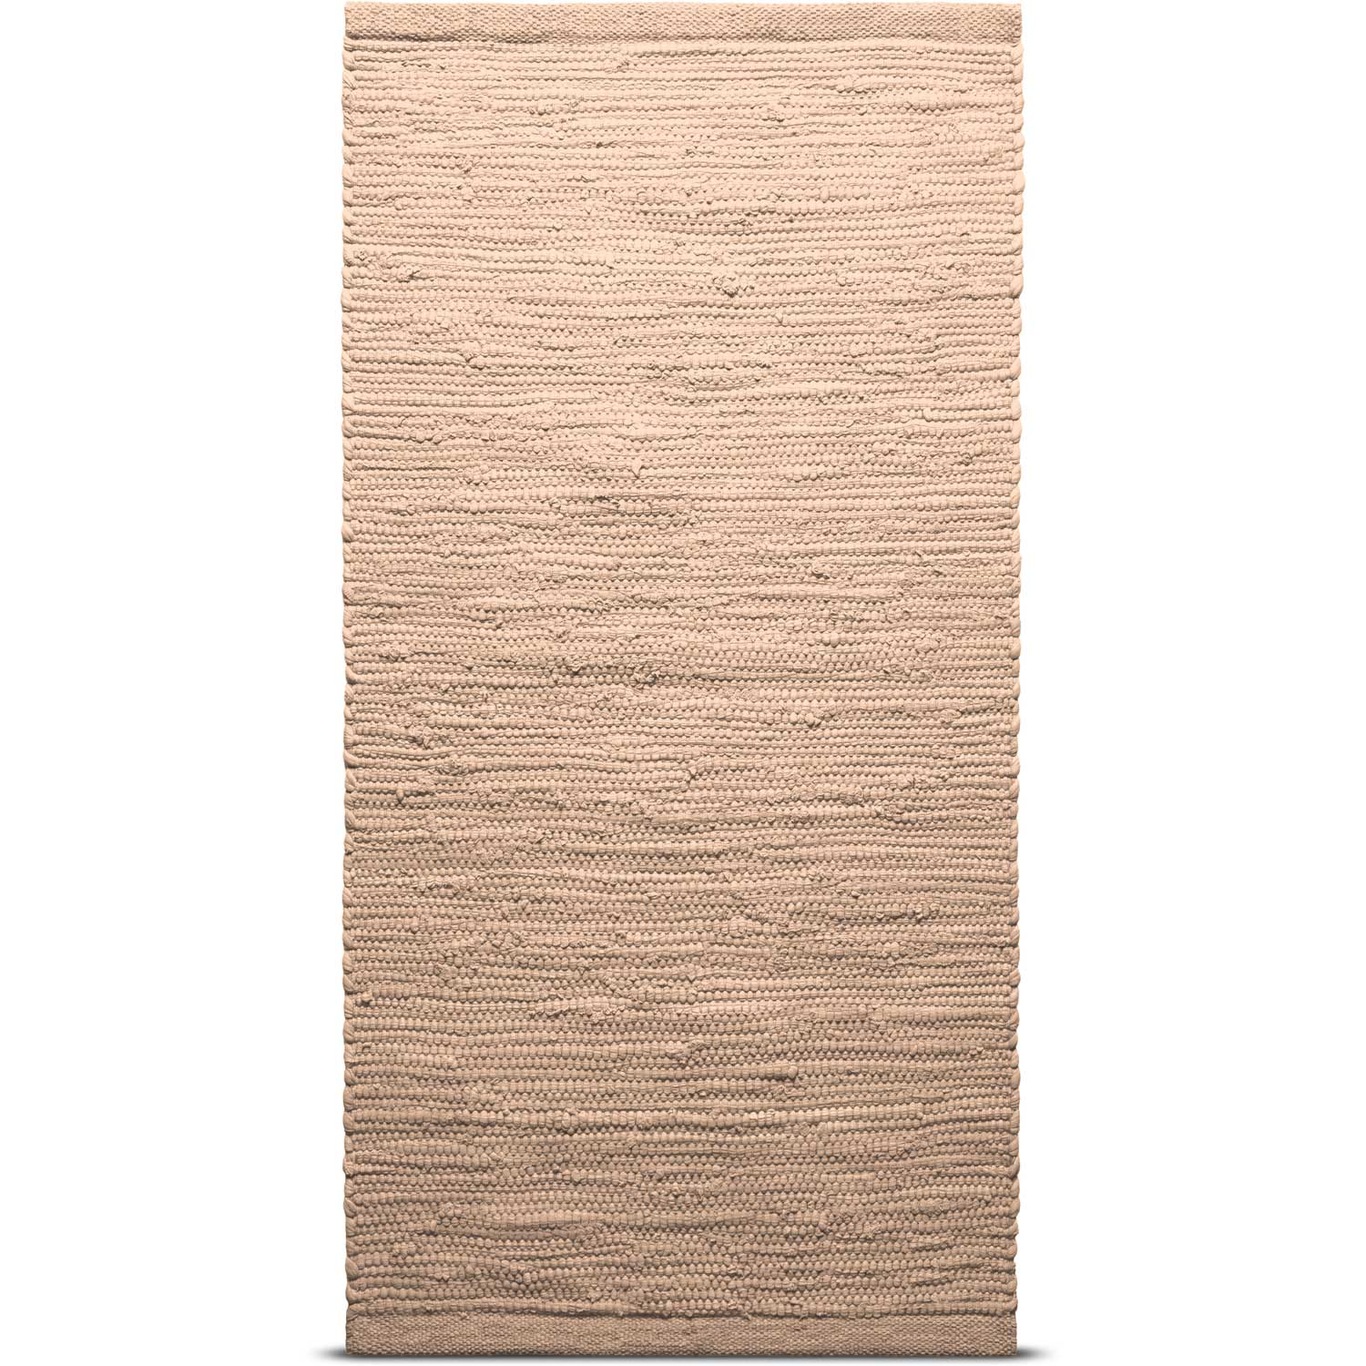 Cotton Rug 75x200cm Soft Peach, What Are The Softest Rugs Made Of